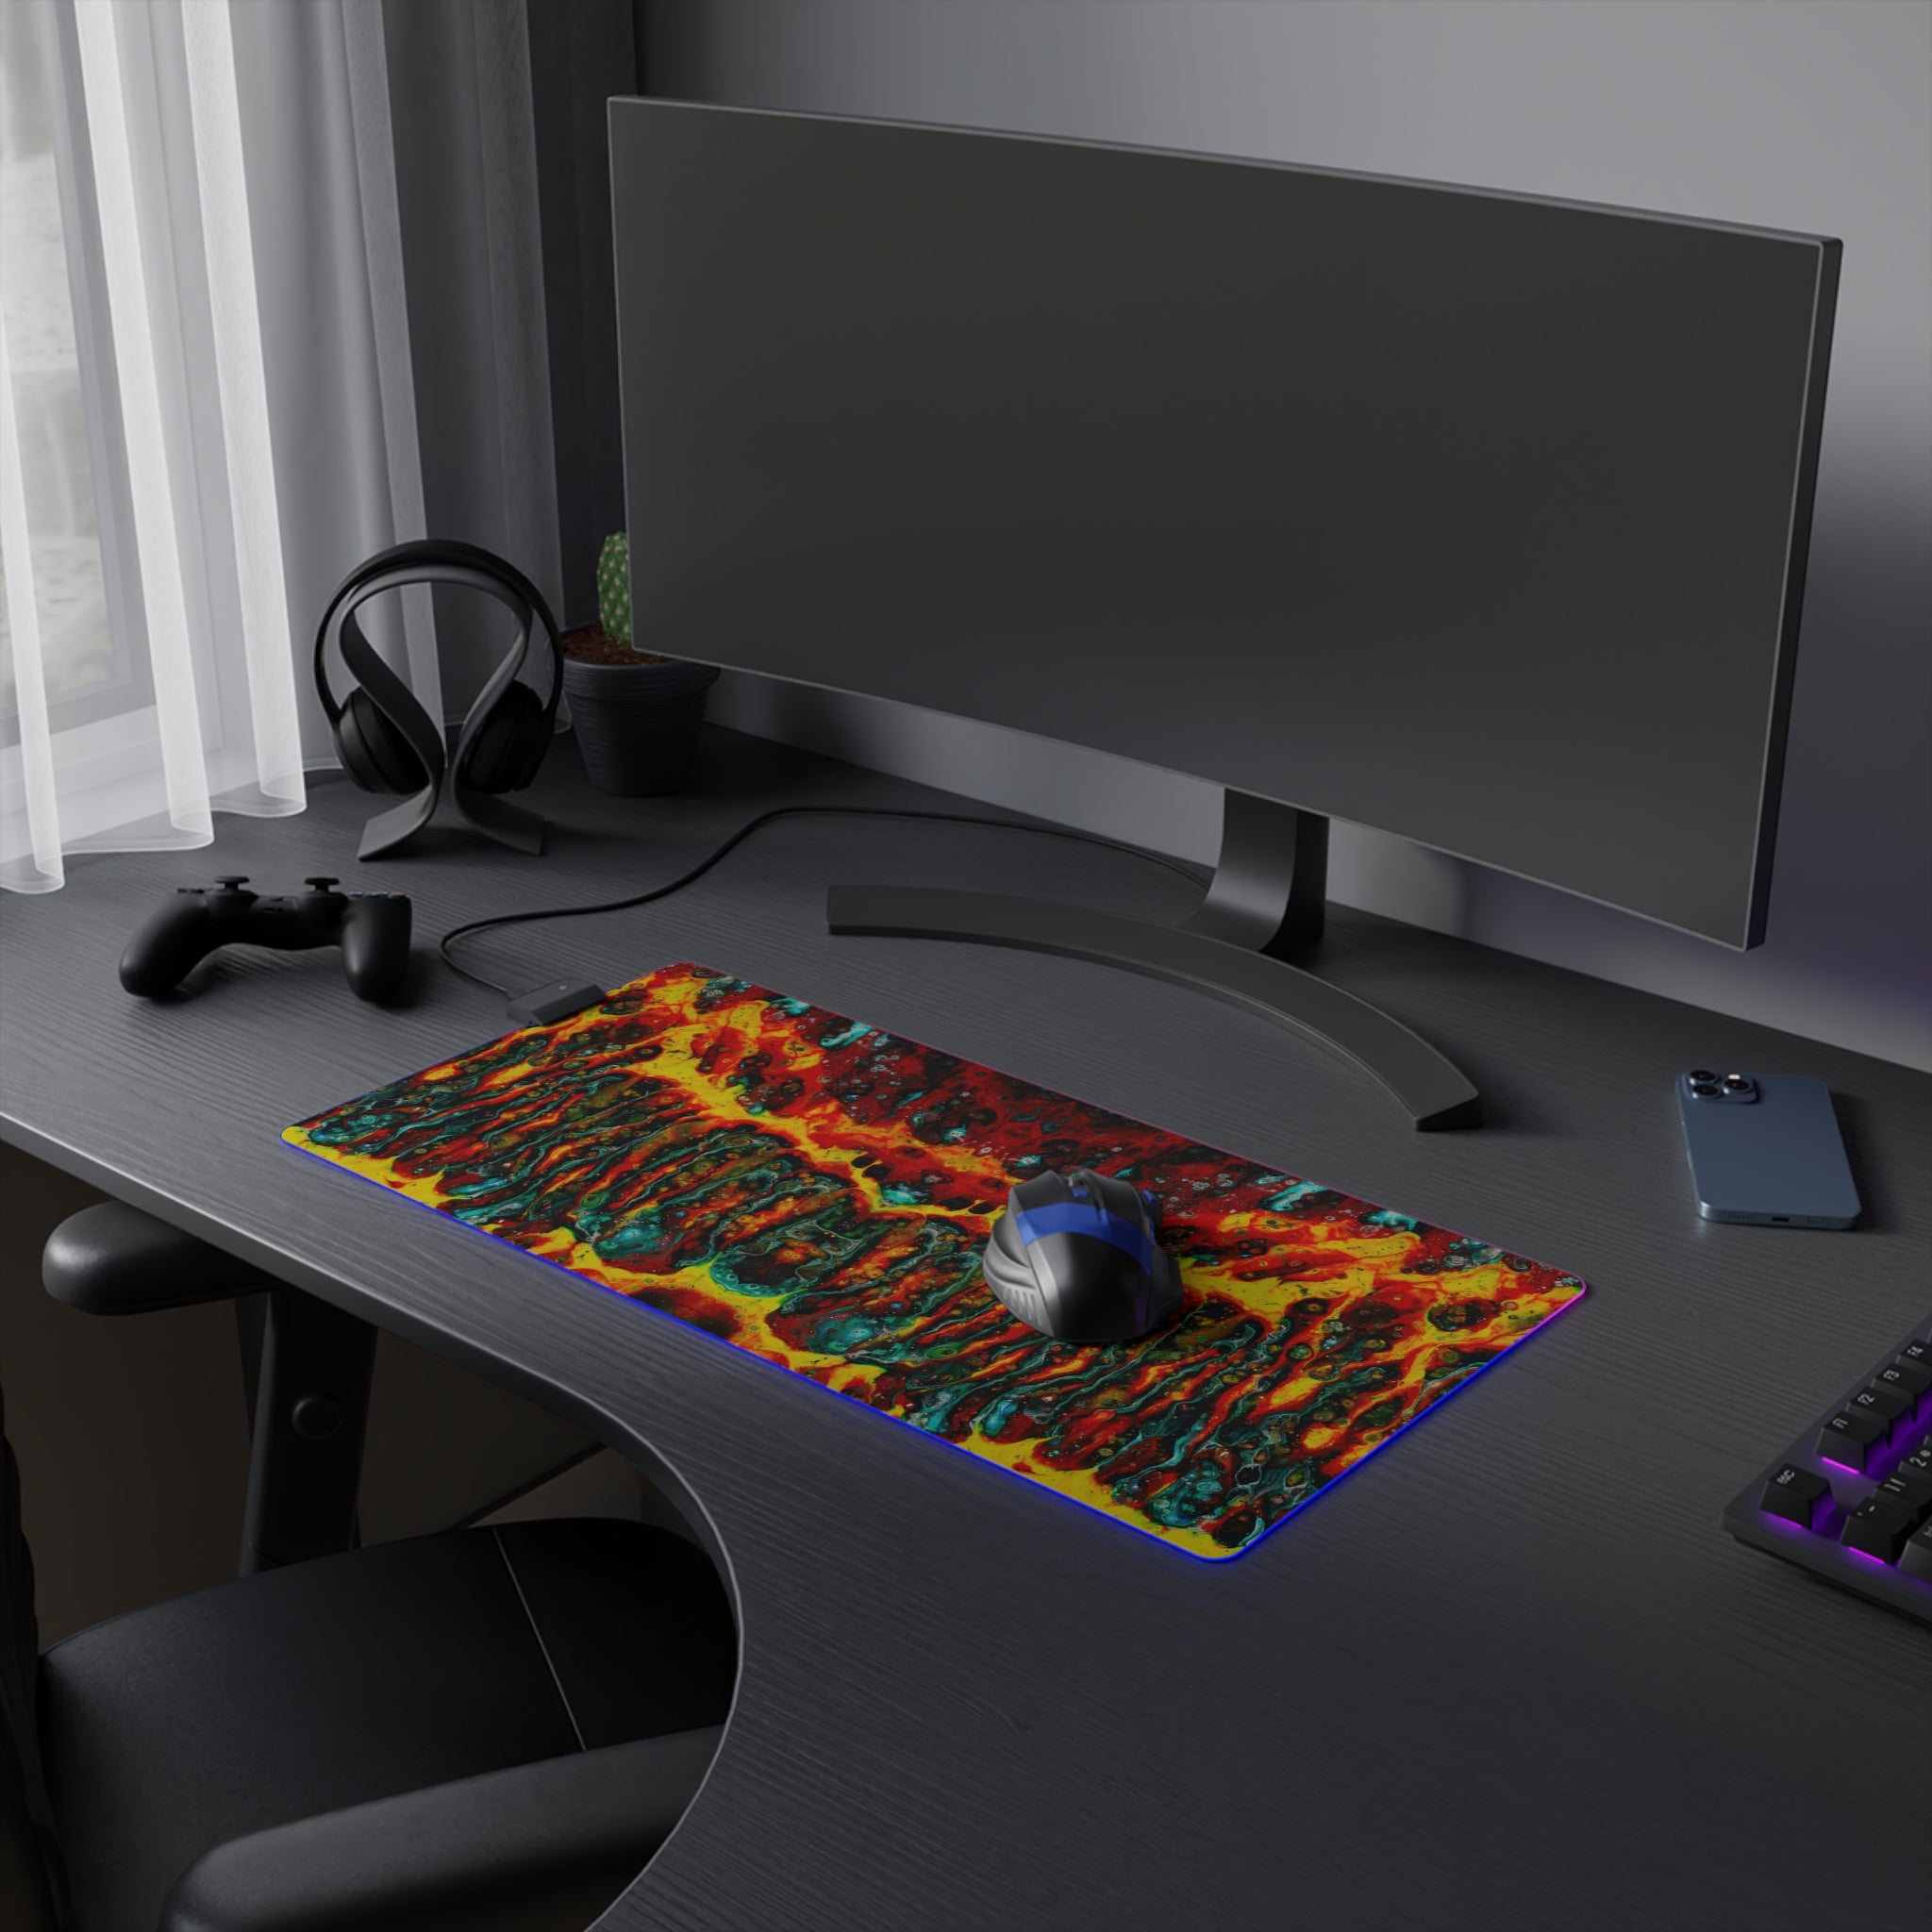 Cameron Creations - LED Gaming Mouse Pad - Floating Flames - Concept 4